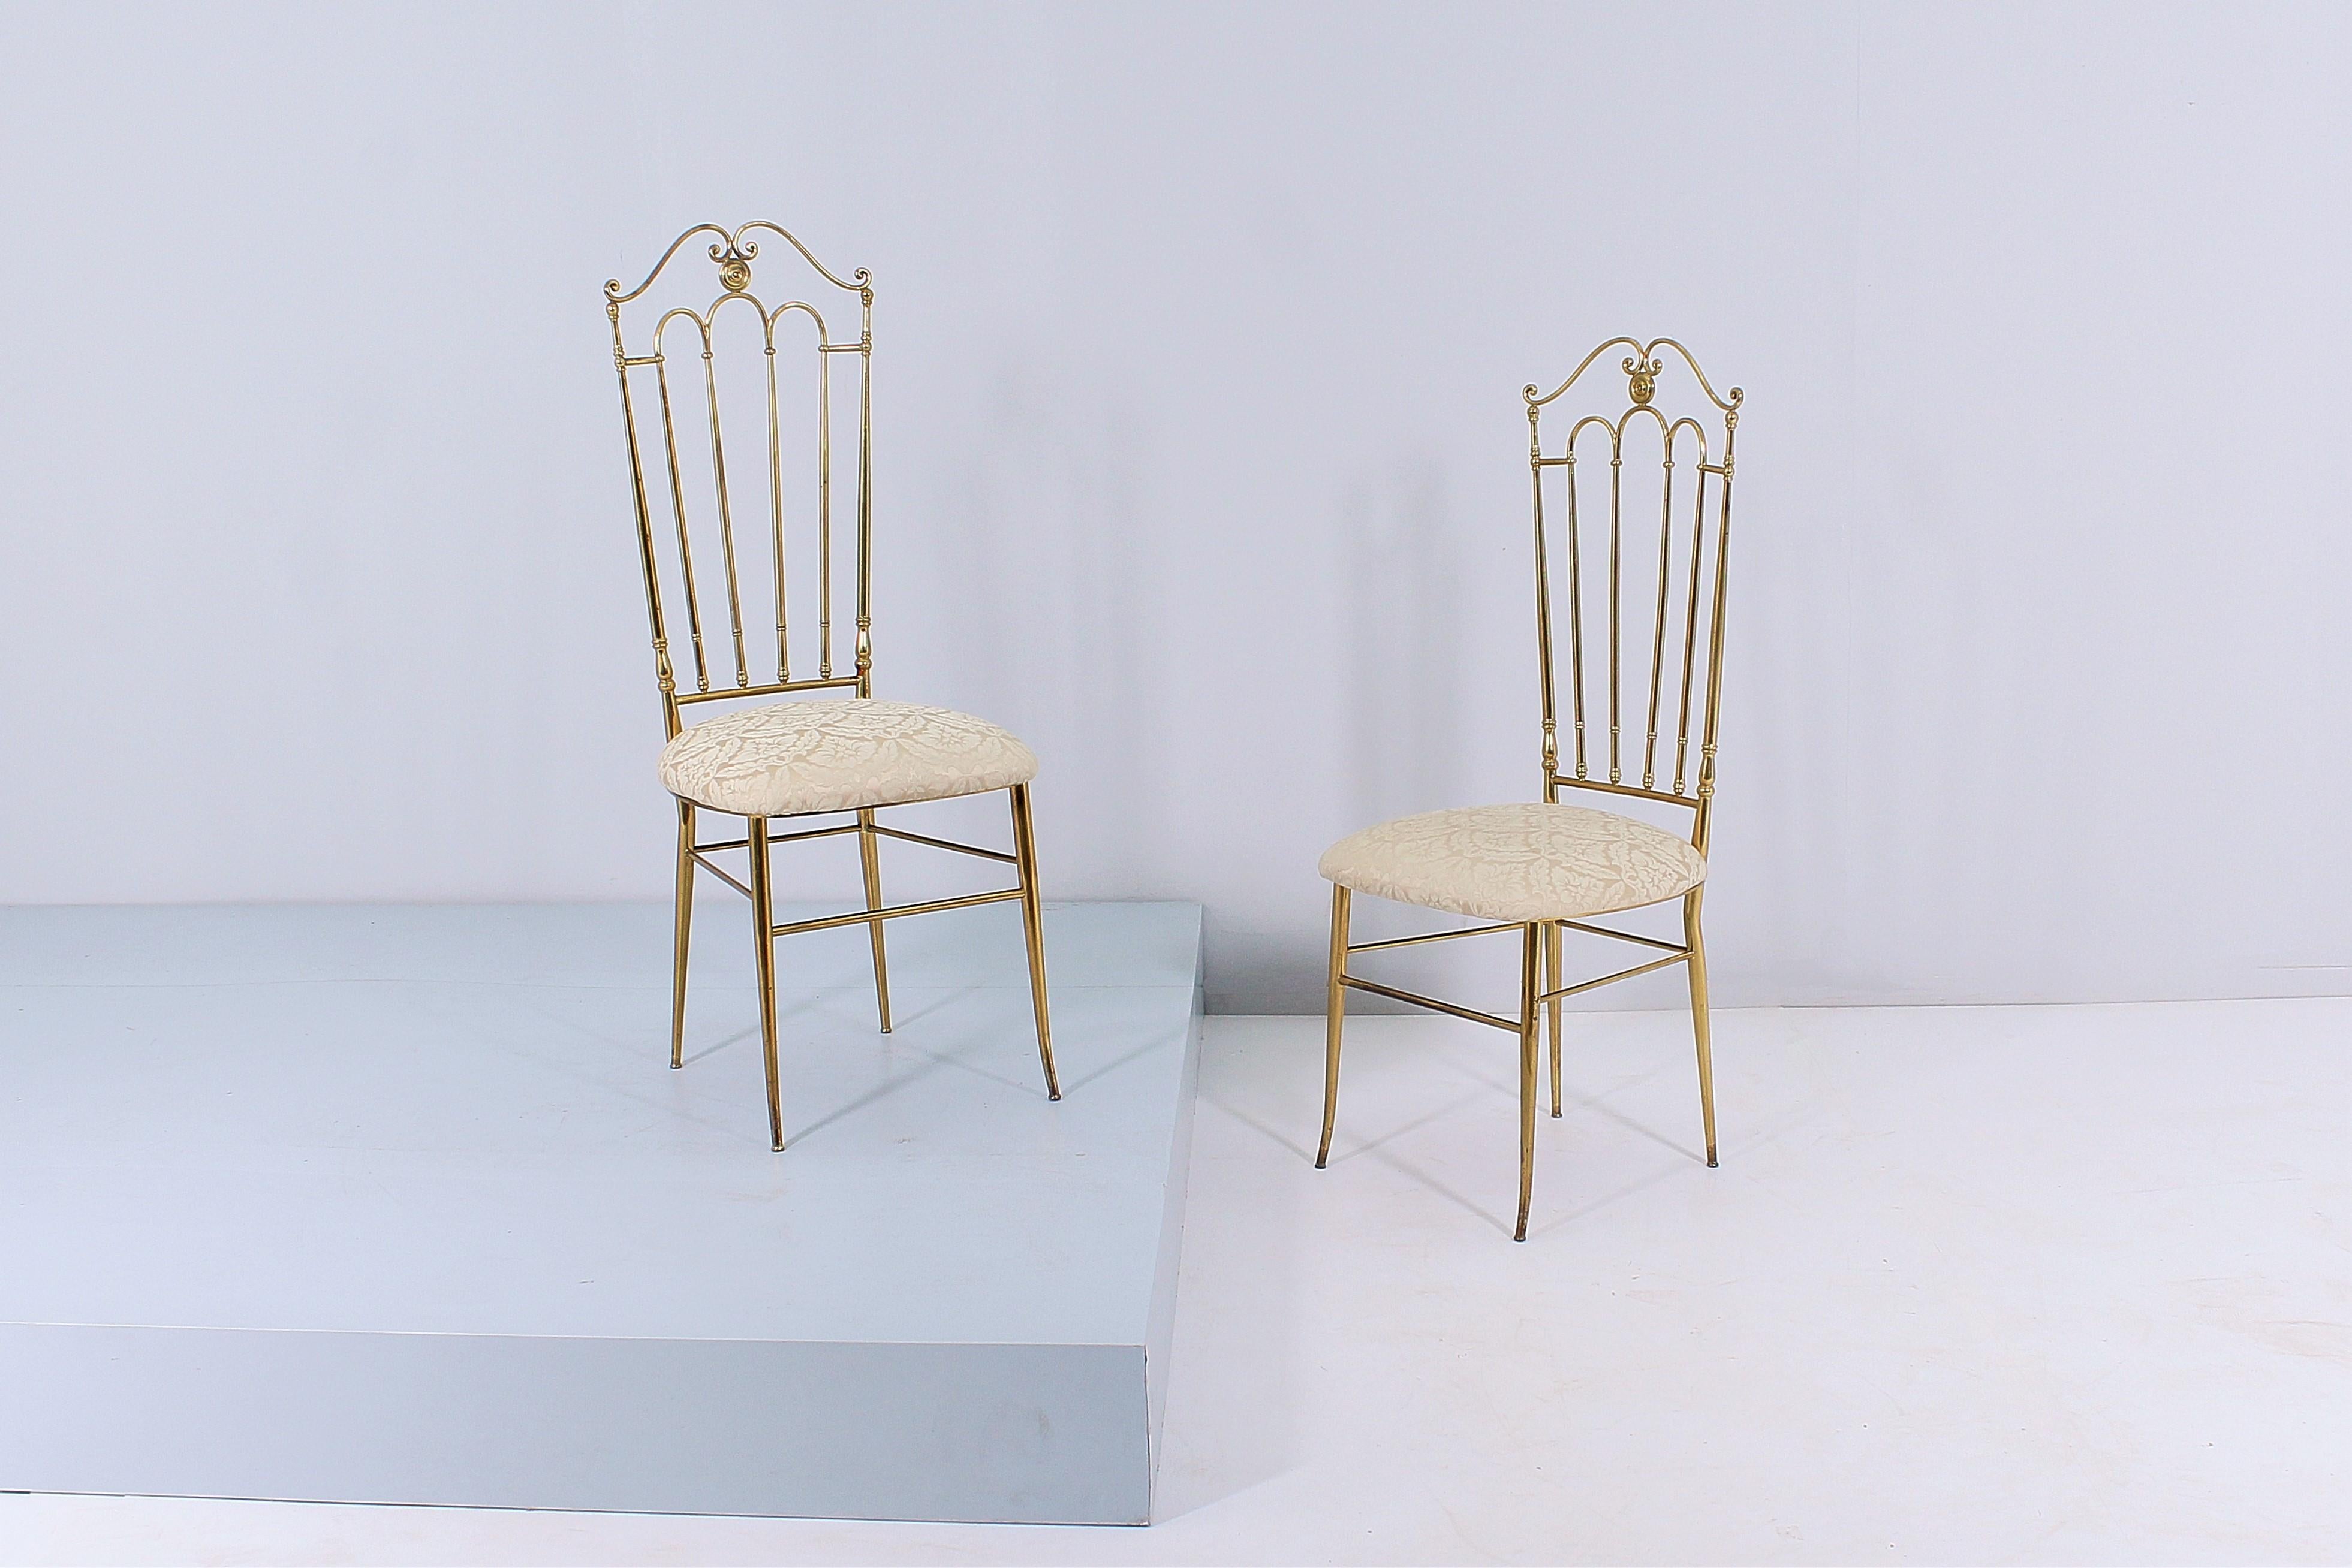 Prestigious pair of dining chairs with high back in gilded brass with seat in beige satin with floral design. Straight lines, curves and decorative elements embellish the design of the entirely brass backs. Attributable to Gaetano Descalzi,